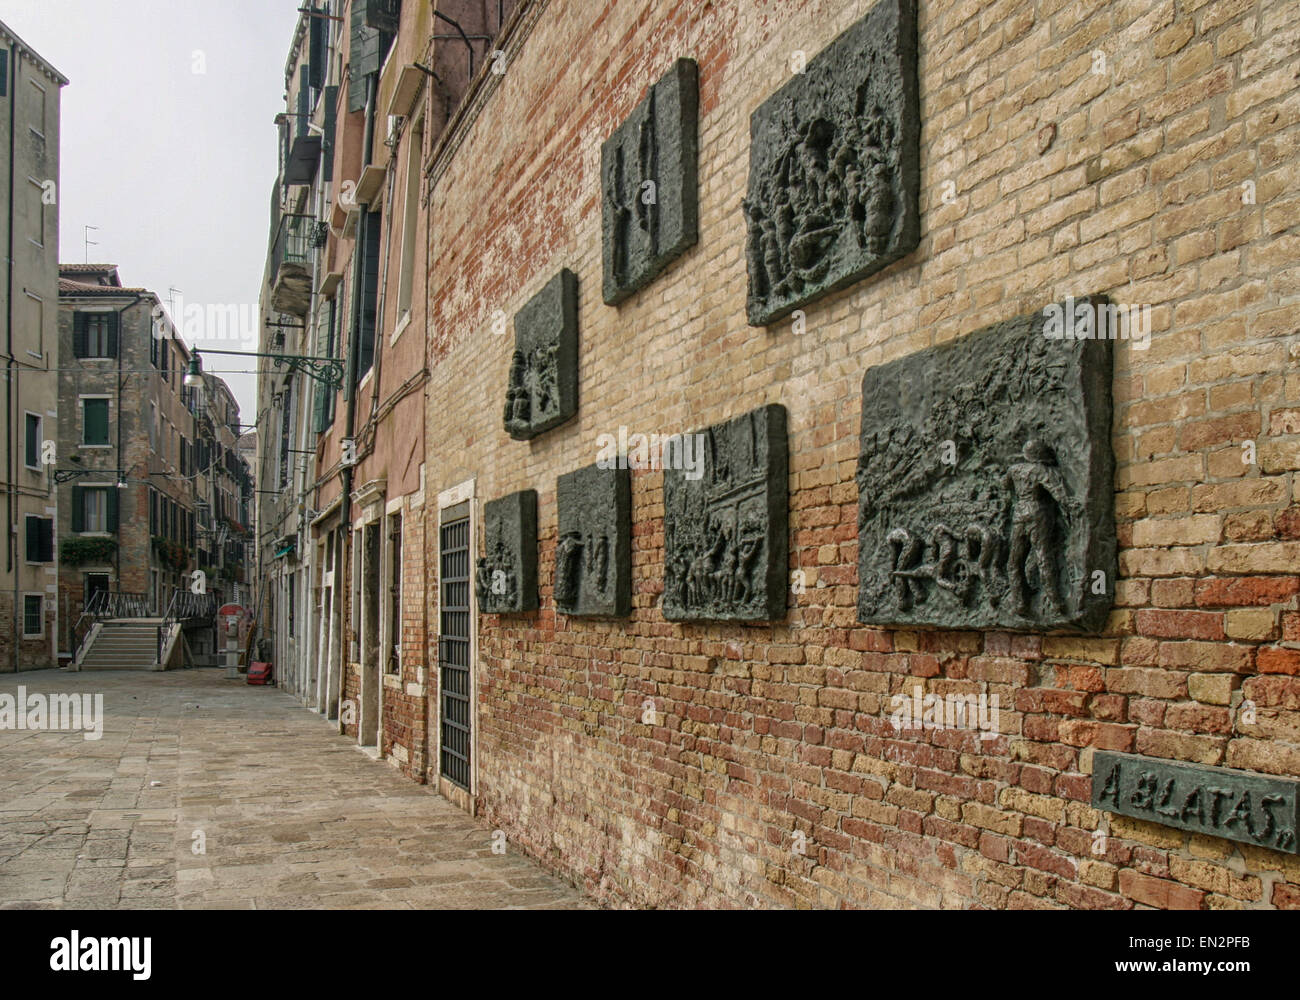 Venice, Province of Venice, ITALY. 7th Oct, 2004. In 1979 Arbit Blatas, a Lithuanian-born artist who lost his mother in the Holocaust, created this seven-panel bronze bas-relief Holocaust memorial, by the request of the Jewish Community of Venice. On a wall of the Campo del Nuovo Ghetto, it commemorates the night of Dec. 5, 1943, when the first 200 of the city's Jews were rounded up and marched out for deportation and death. Venice, a UNESCO World Heritage Site, is one of the most popular international tourist destinations. © Arnold Drapkin/ZUMA Wire/Alamy Live News Stock Photo